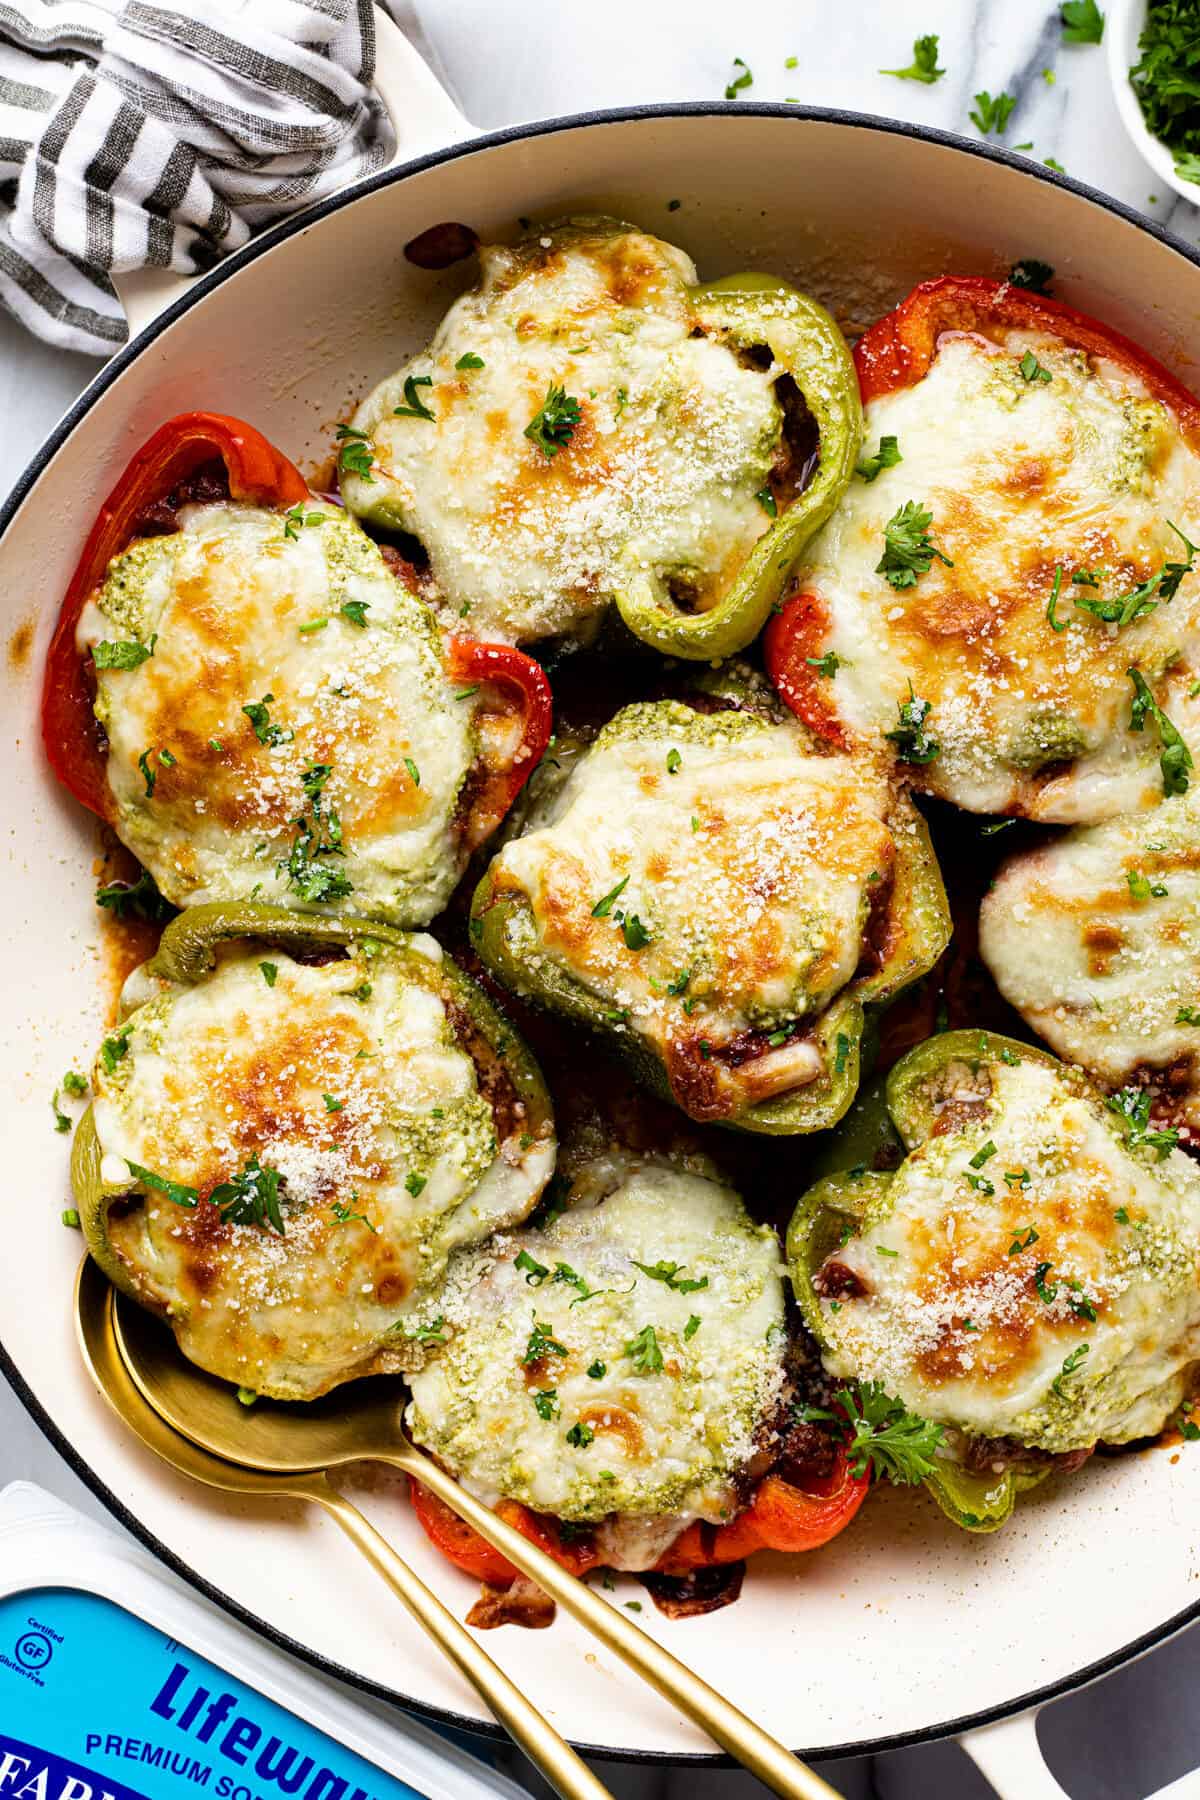 Large white pan filled with Italian stuffed peppers garnished with parsley.